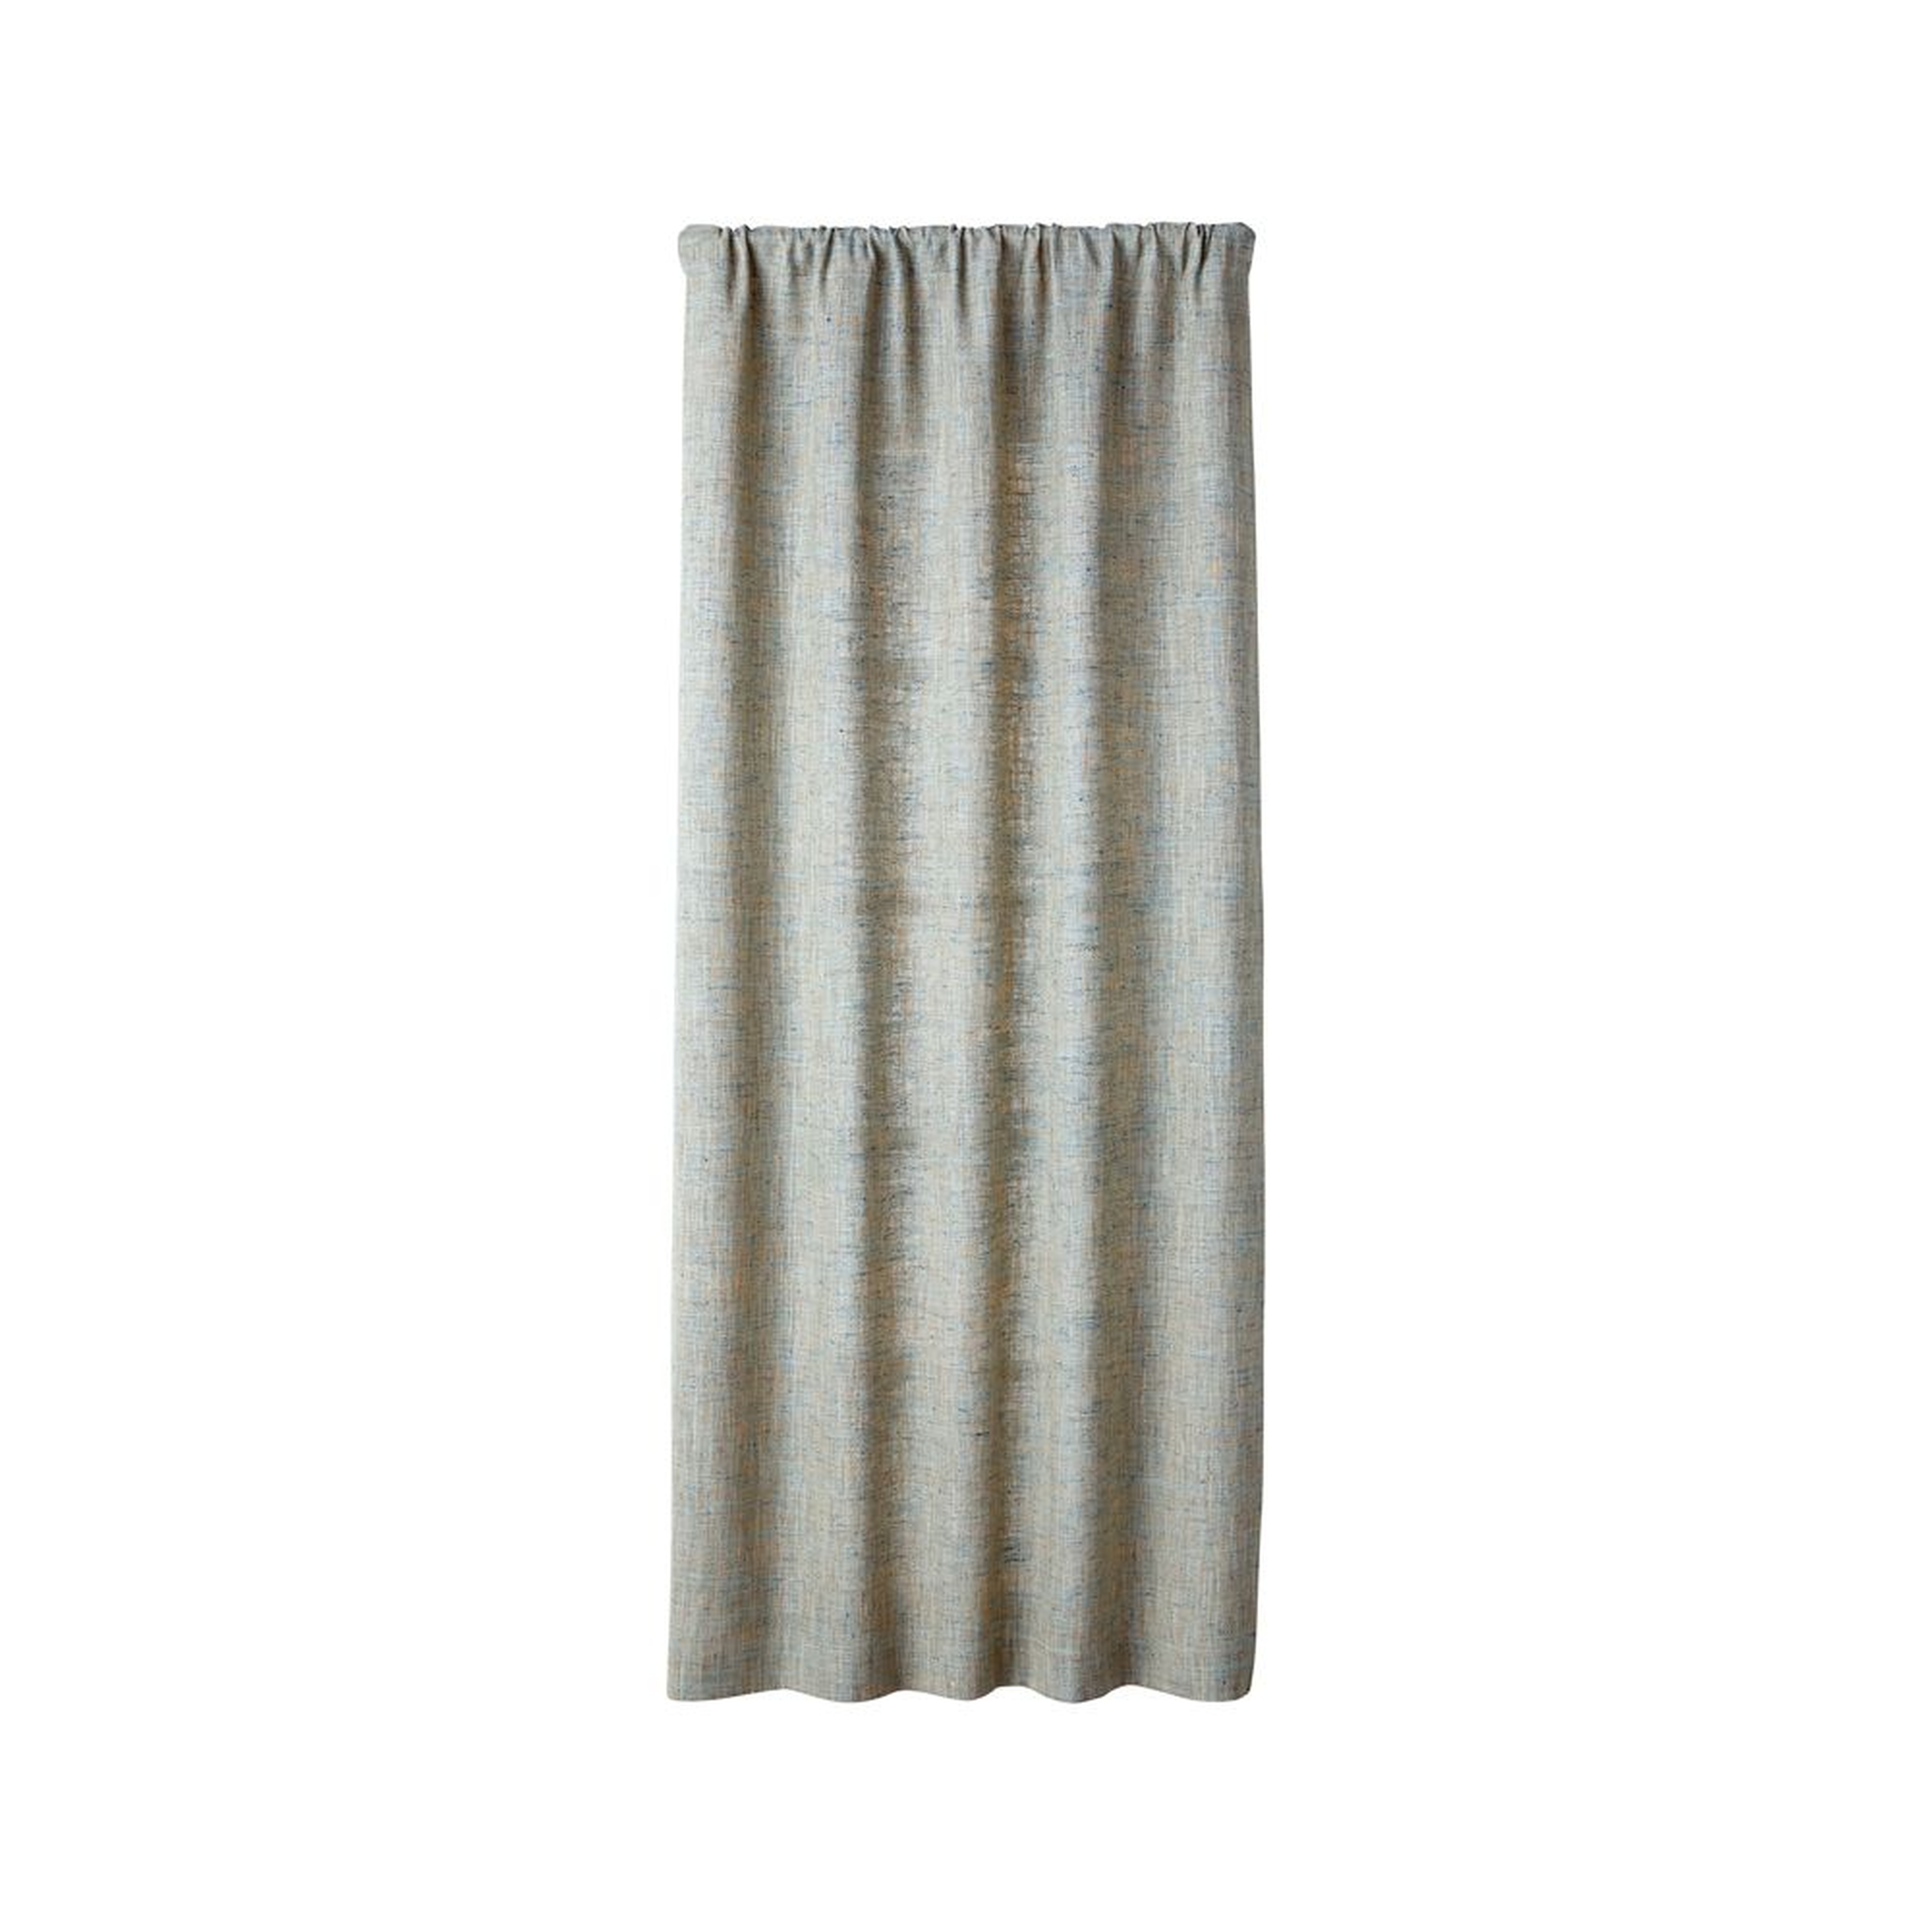 Reid Abyss Curtain Panel 48"x108" - Crate and Barrel